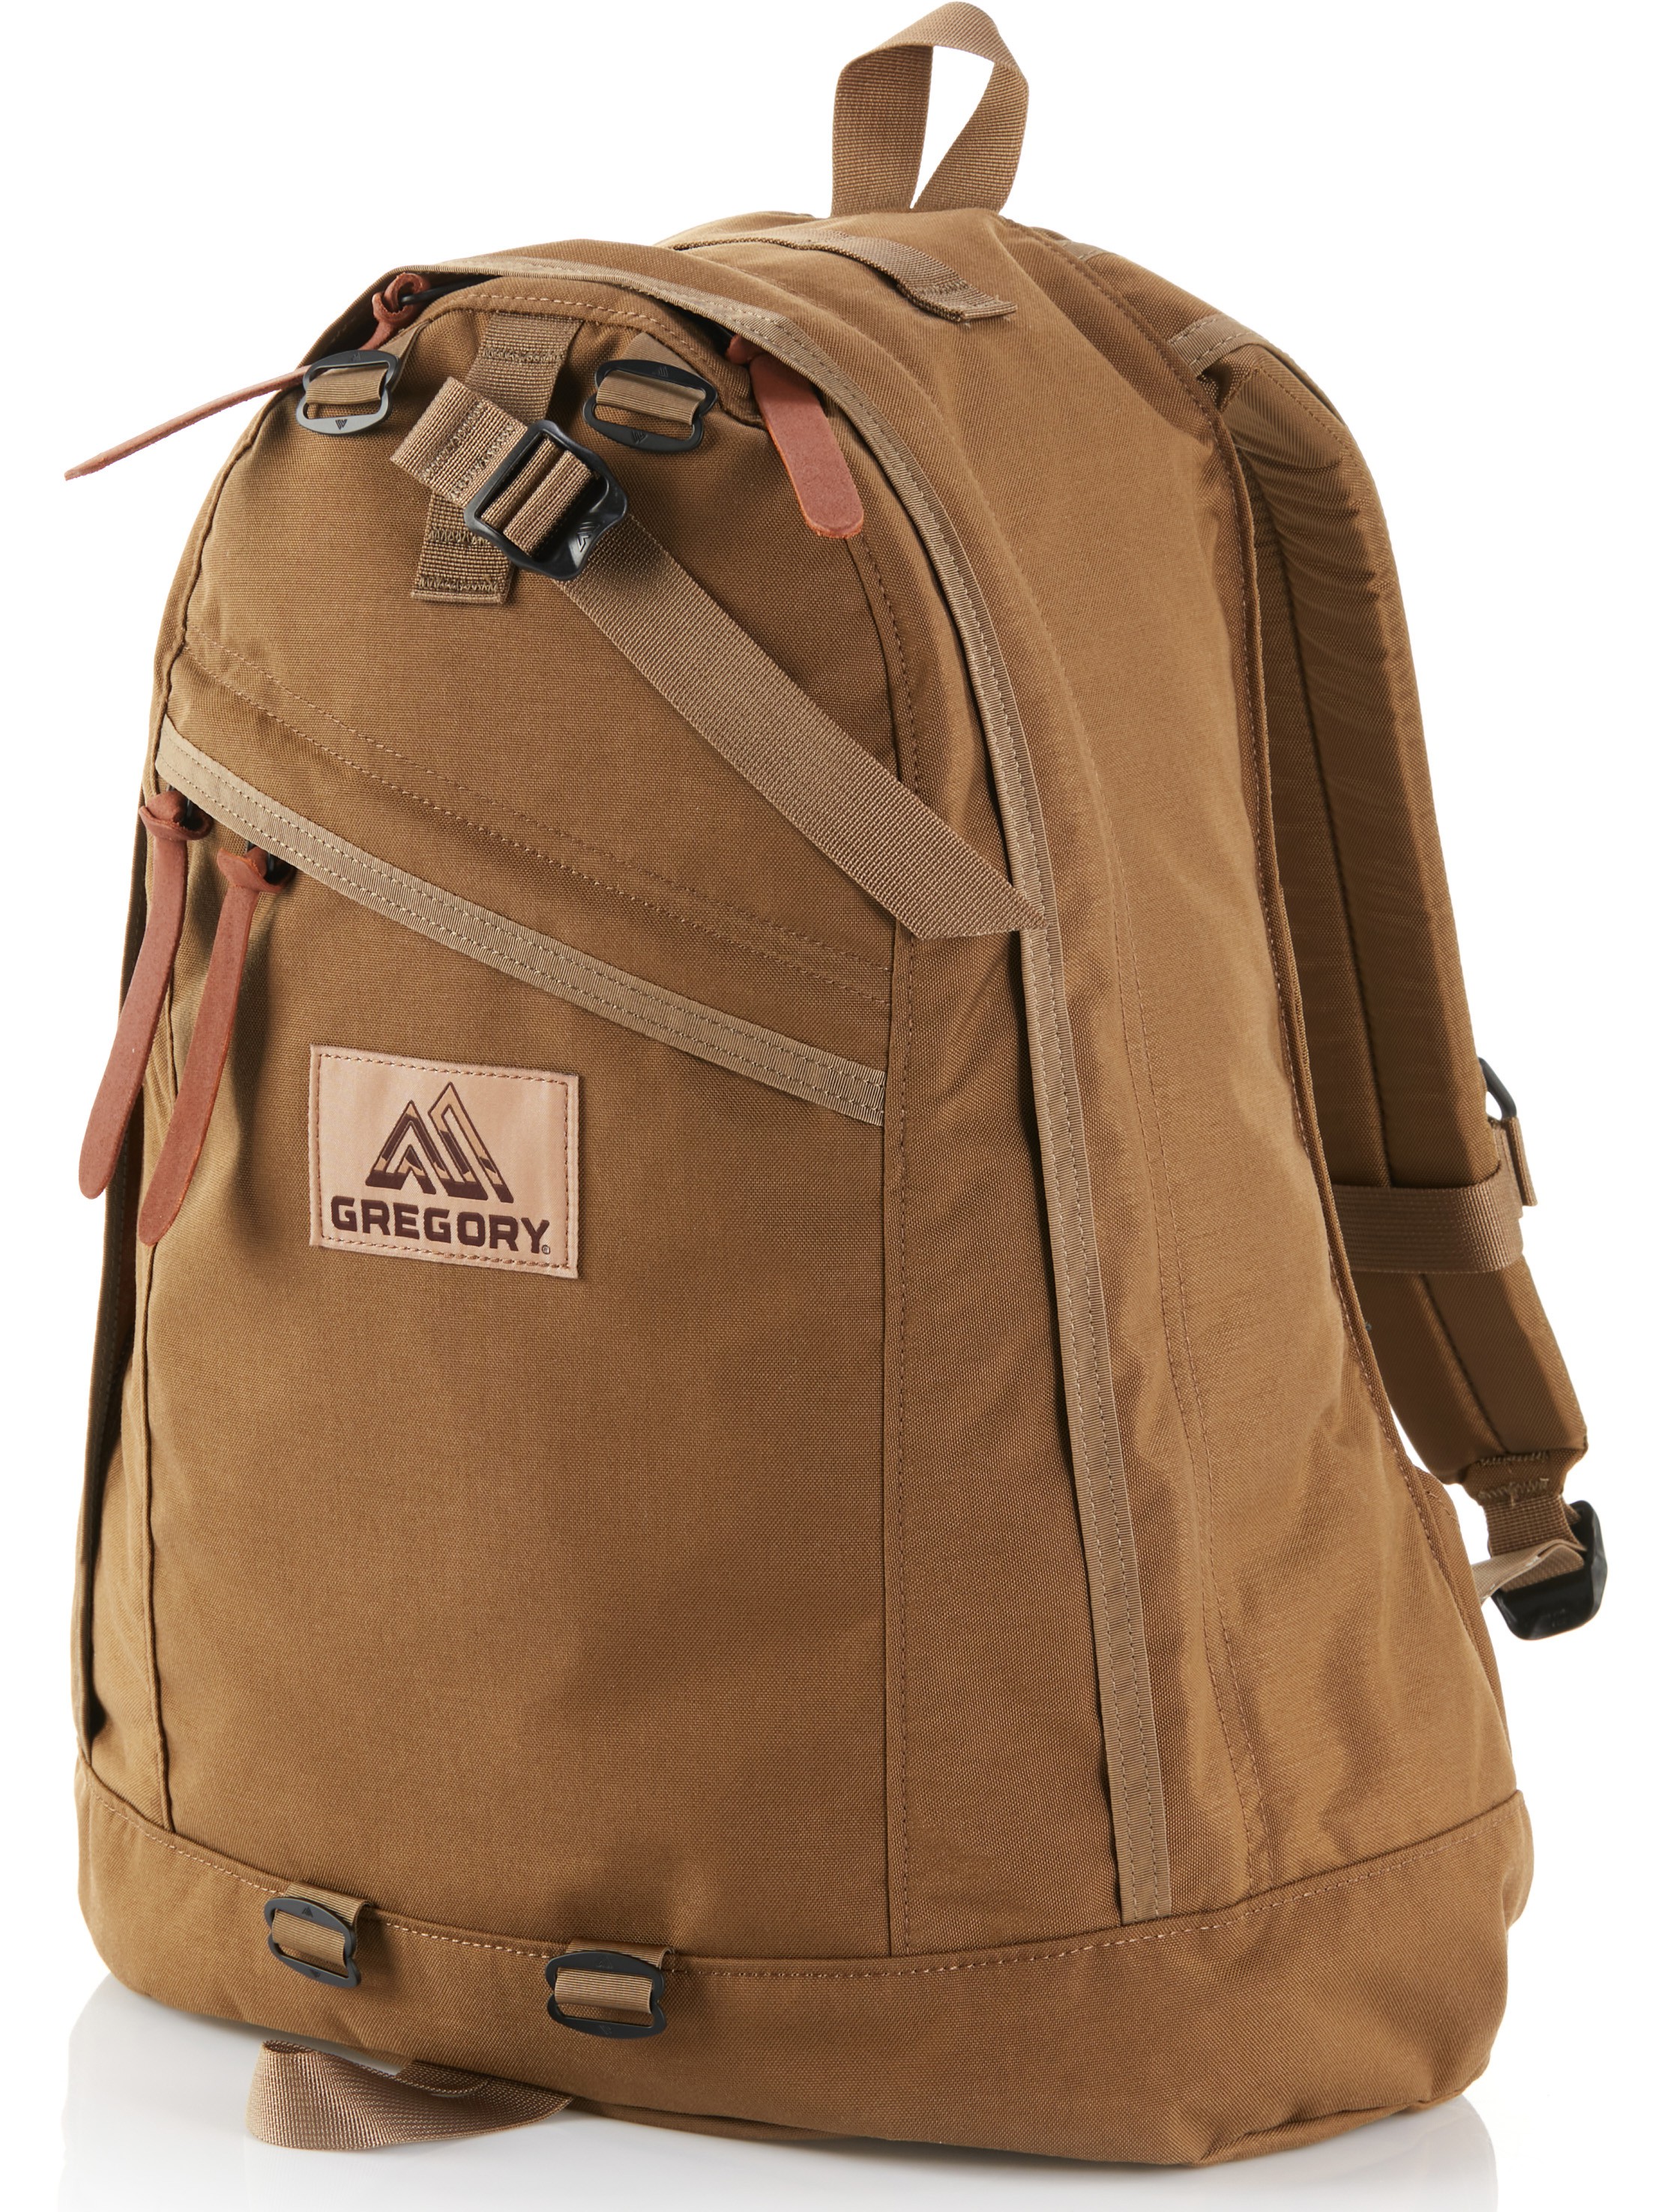 Gregory Classic Backpack - Day 背囊 Coyote 26L 香港行貨